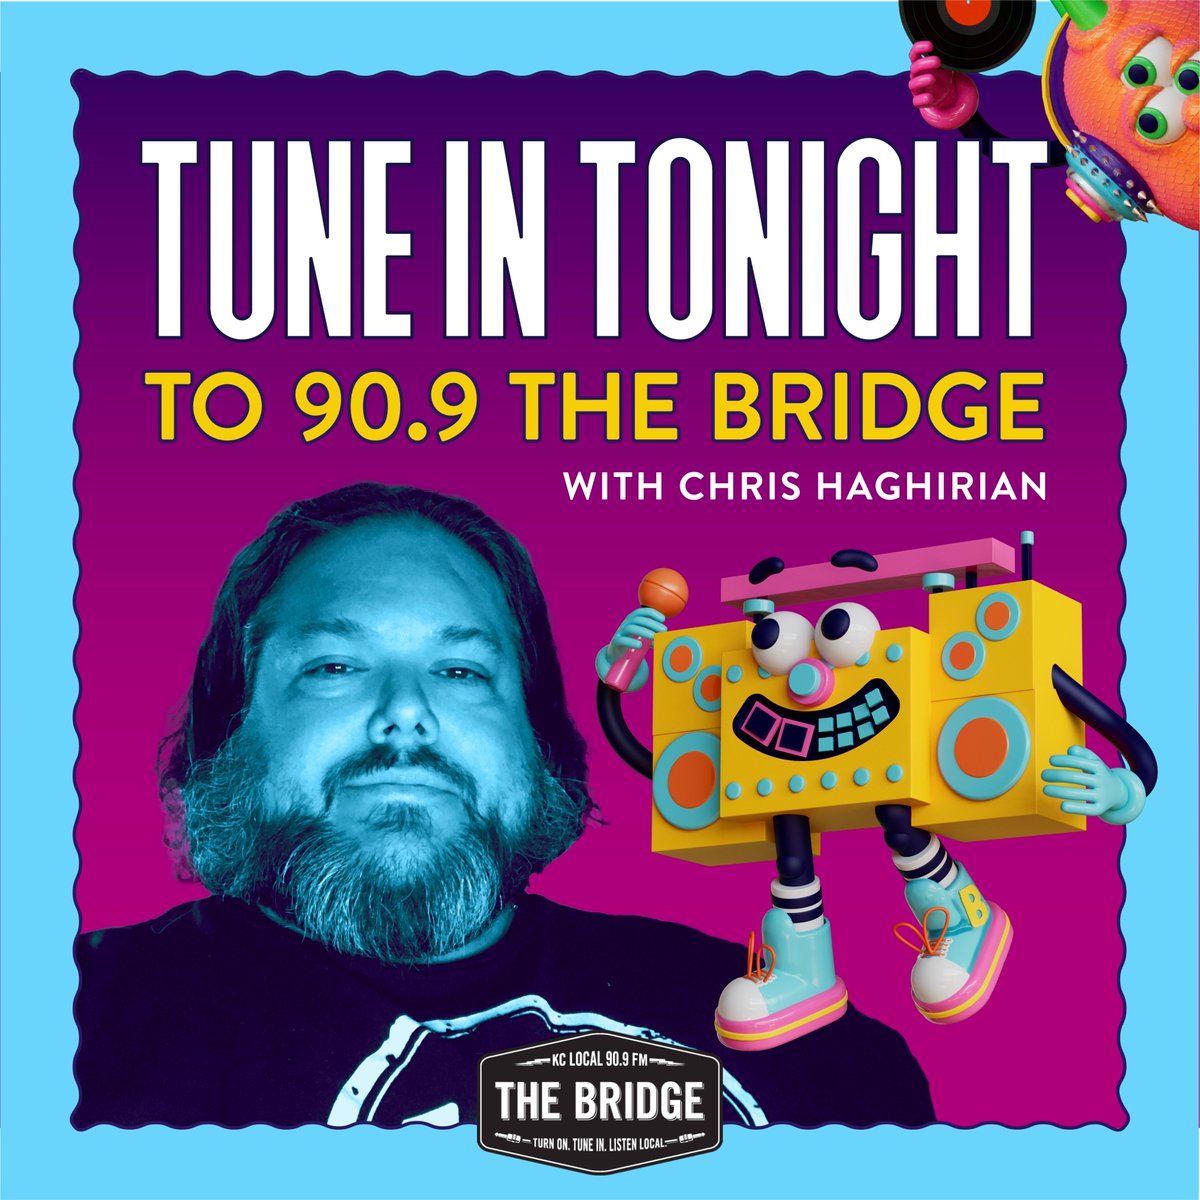 From 6-7PM tonight @chrishaghirian will be talking in-depth about the BLVDIA lineup. Listen live or stream the show: 90.9 FM The Bridge and learn more about the amazing artists performing this year!